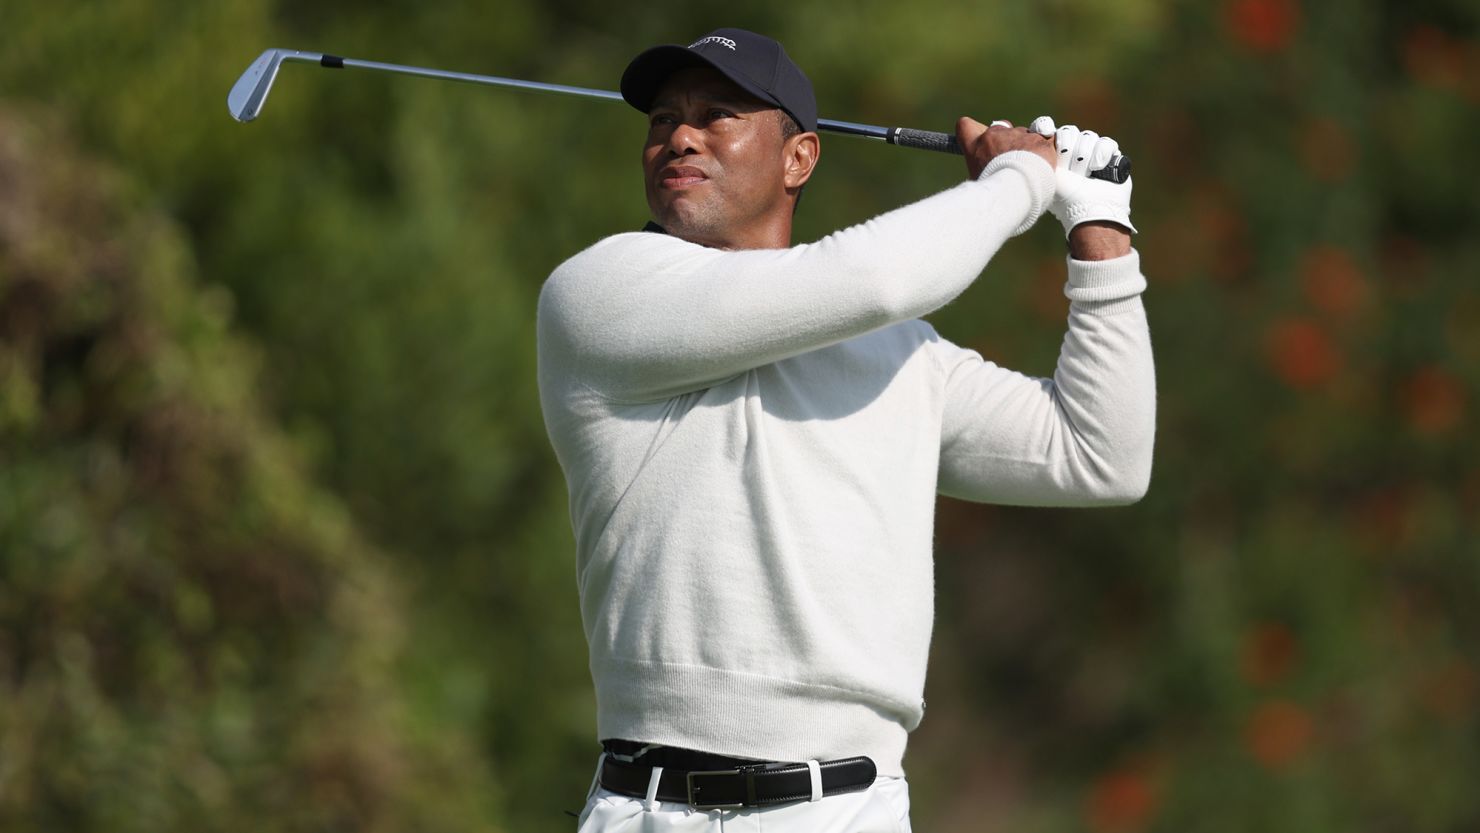 Tiger Woods shoots oneover, including shank on final hole, in return